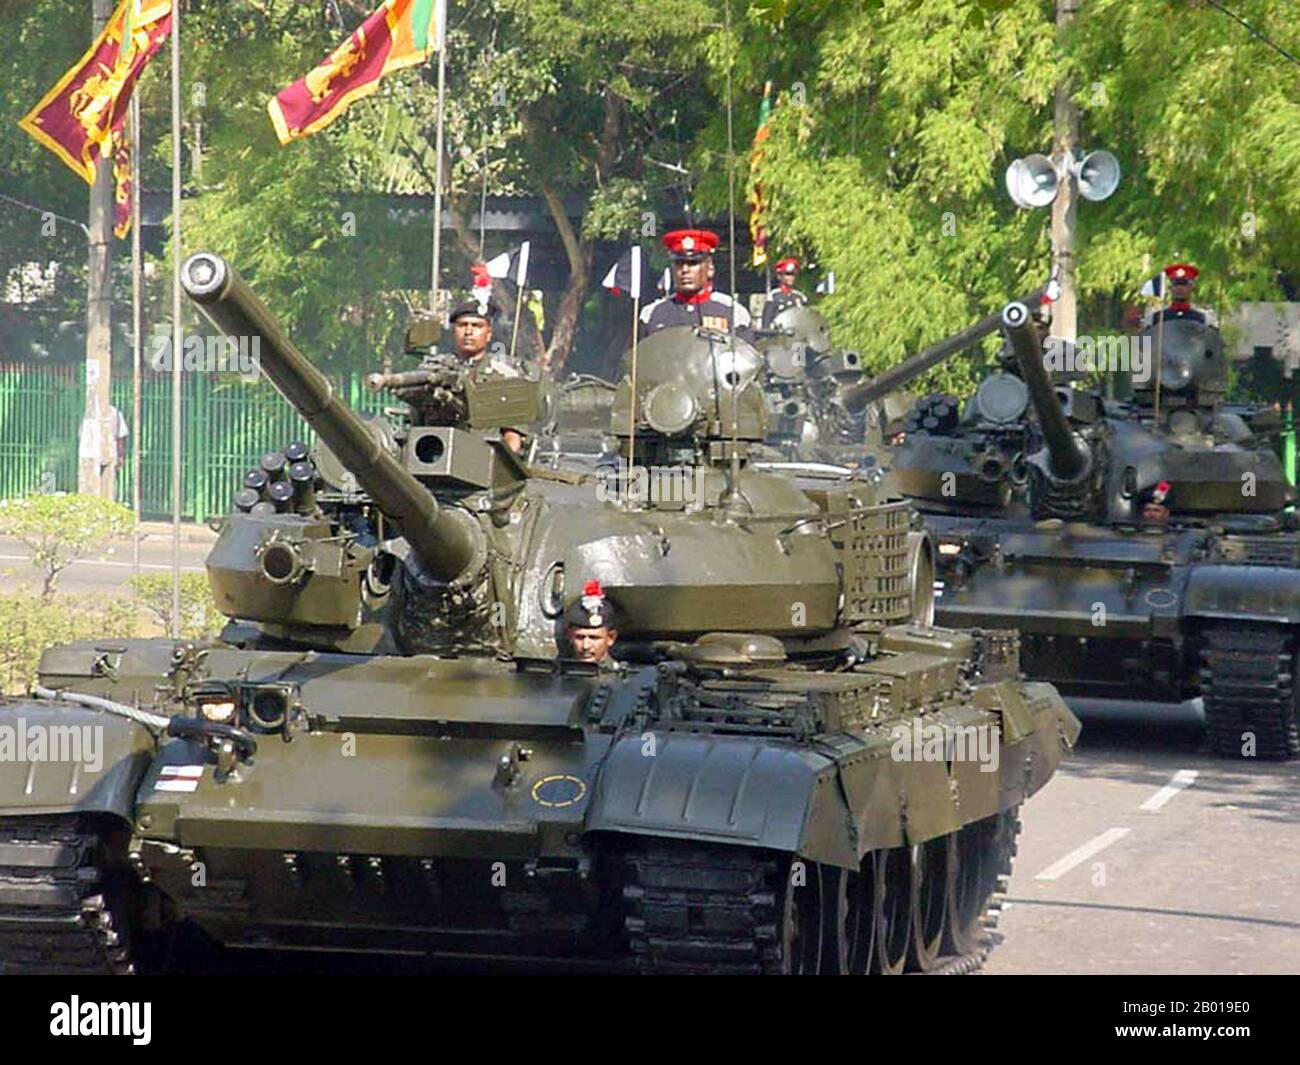 Sri Lanka: Sri Lanka Army T55 tanks during a victory parade in Colombo, 2009. Photo from the Sri Lanka Ministry of Defence (CC BY-SA 3.0 License).  The Sri Lankan Civil War was a conflict fought on the island of Sri Lanka. Beginning on 23 June, 1983, there was an on-and-off insurgency against the government by the Liberation Tigers of Tamil Eelam (the LTTE, also known as the Tamil Tigers and other few rebel groups), a separatist militant organization which fought to create an independent Tamil state named Tamil Eelam in the north and the east of the island. Stock Photo